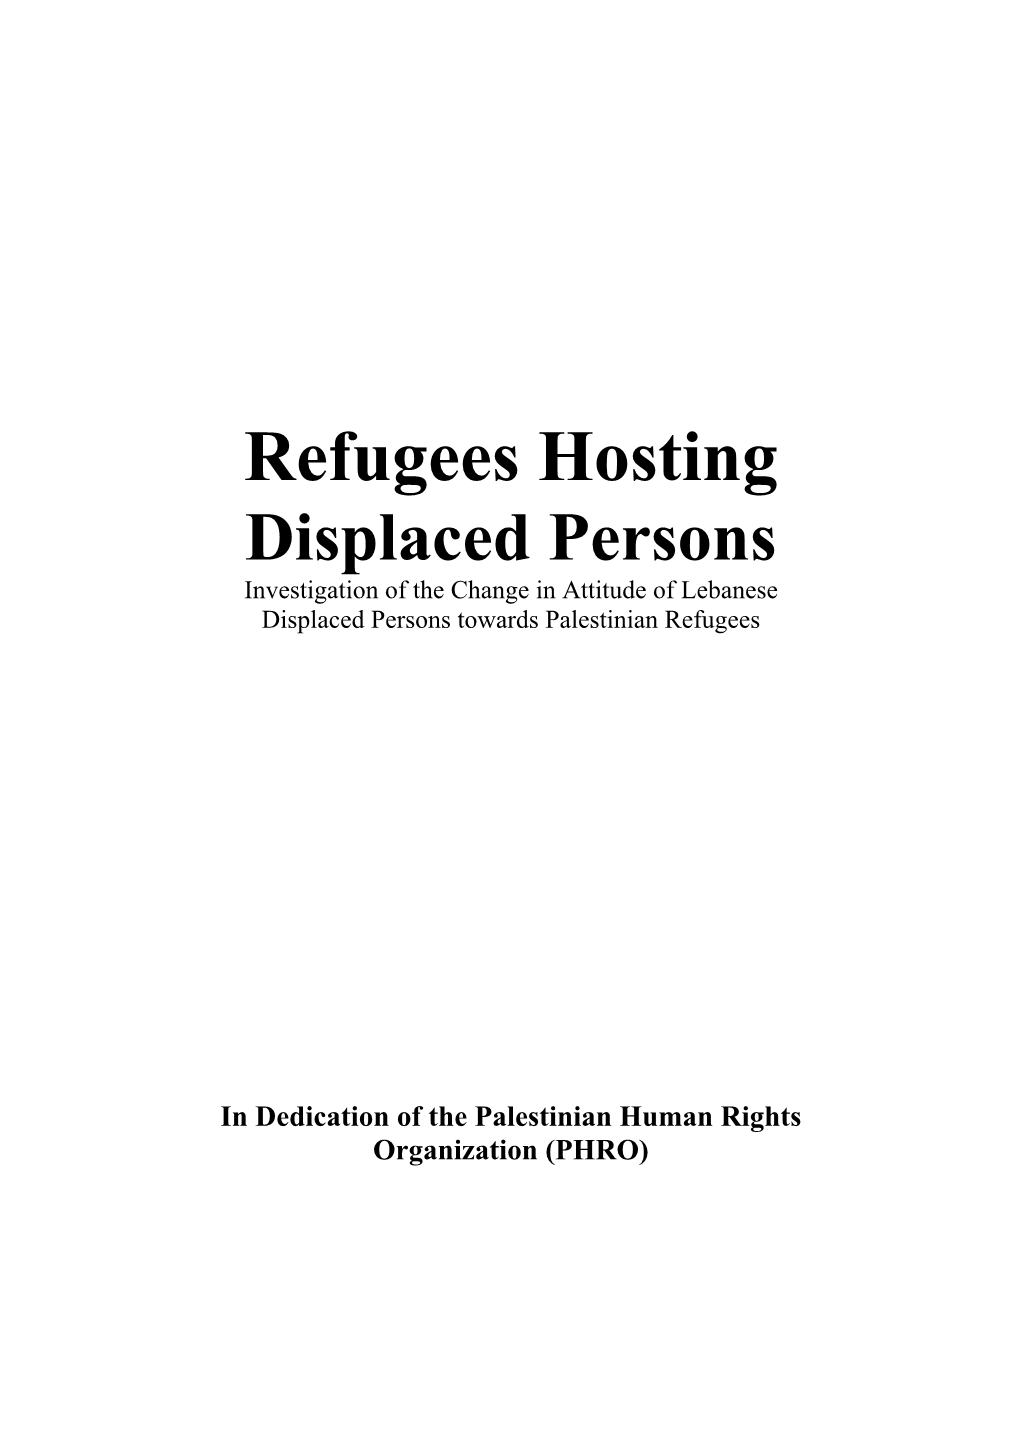 Refugees Hosting Displaced Persons Investigation of the Change in Attitude of Lebanese Displaced Persons Towards Palestinian Refugees